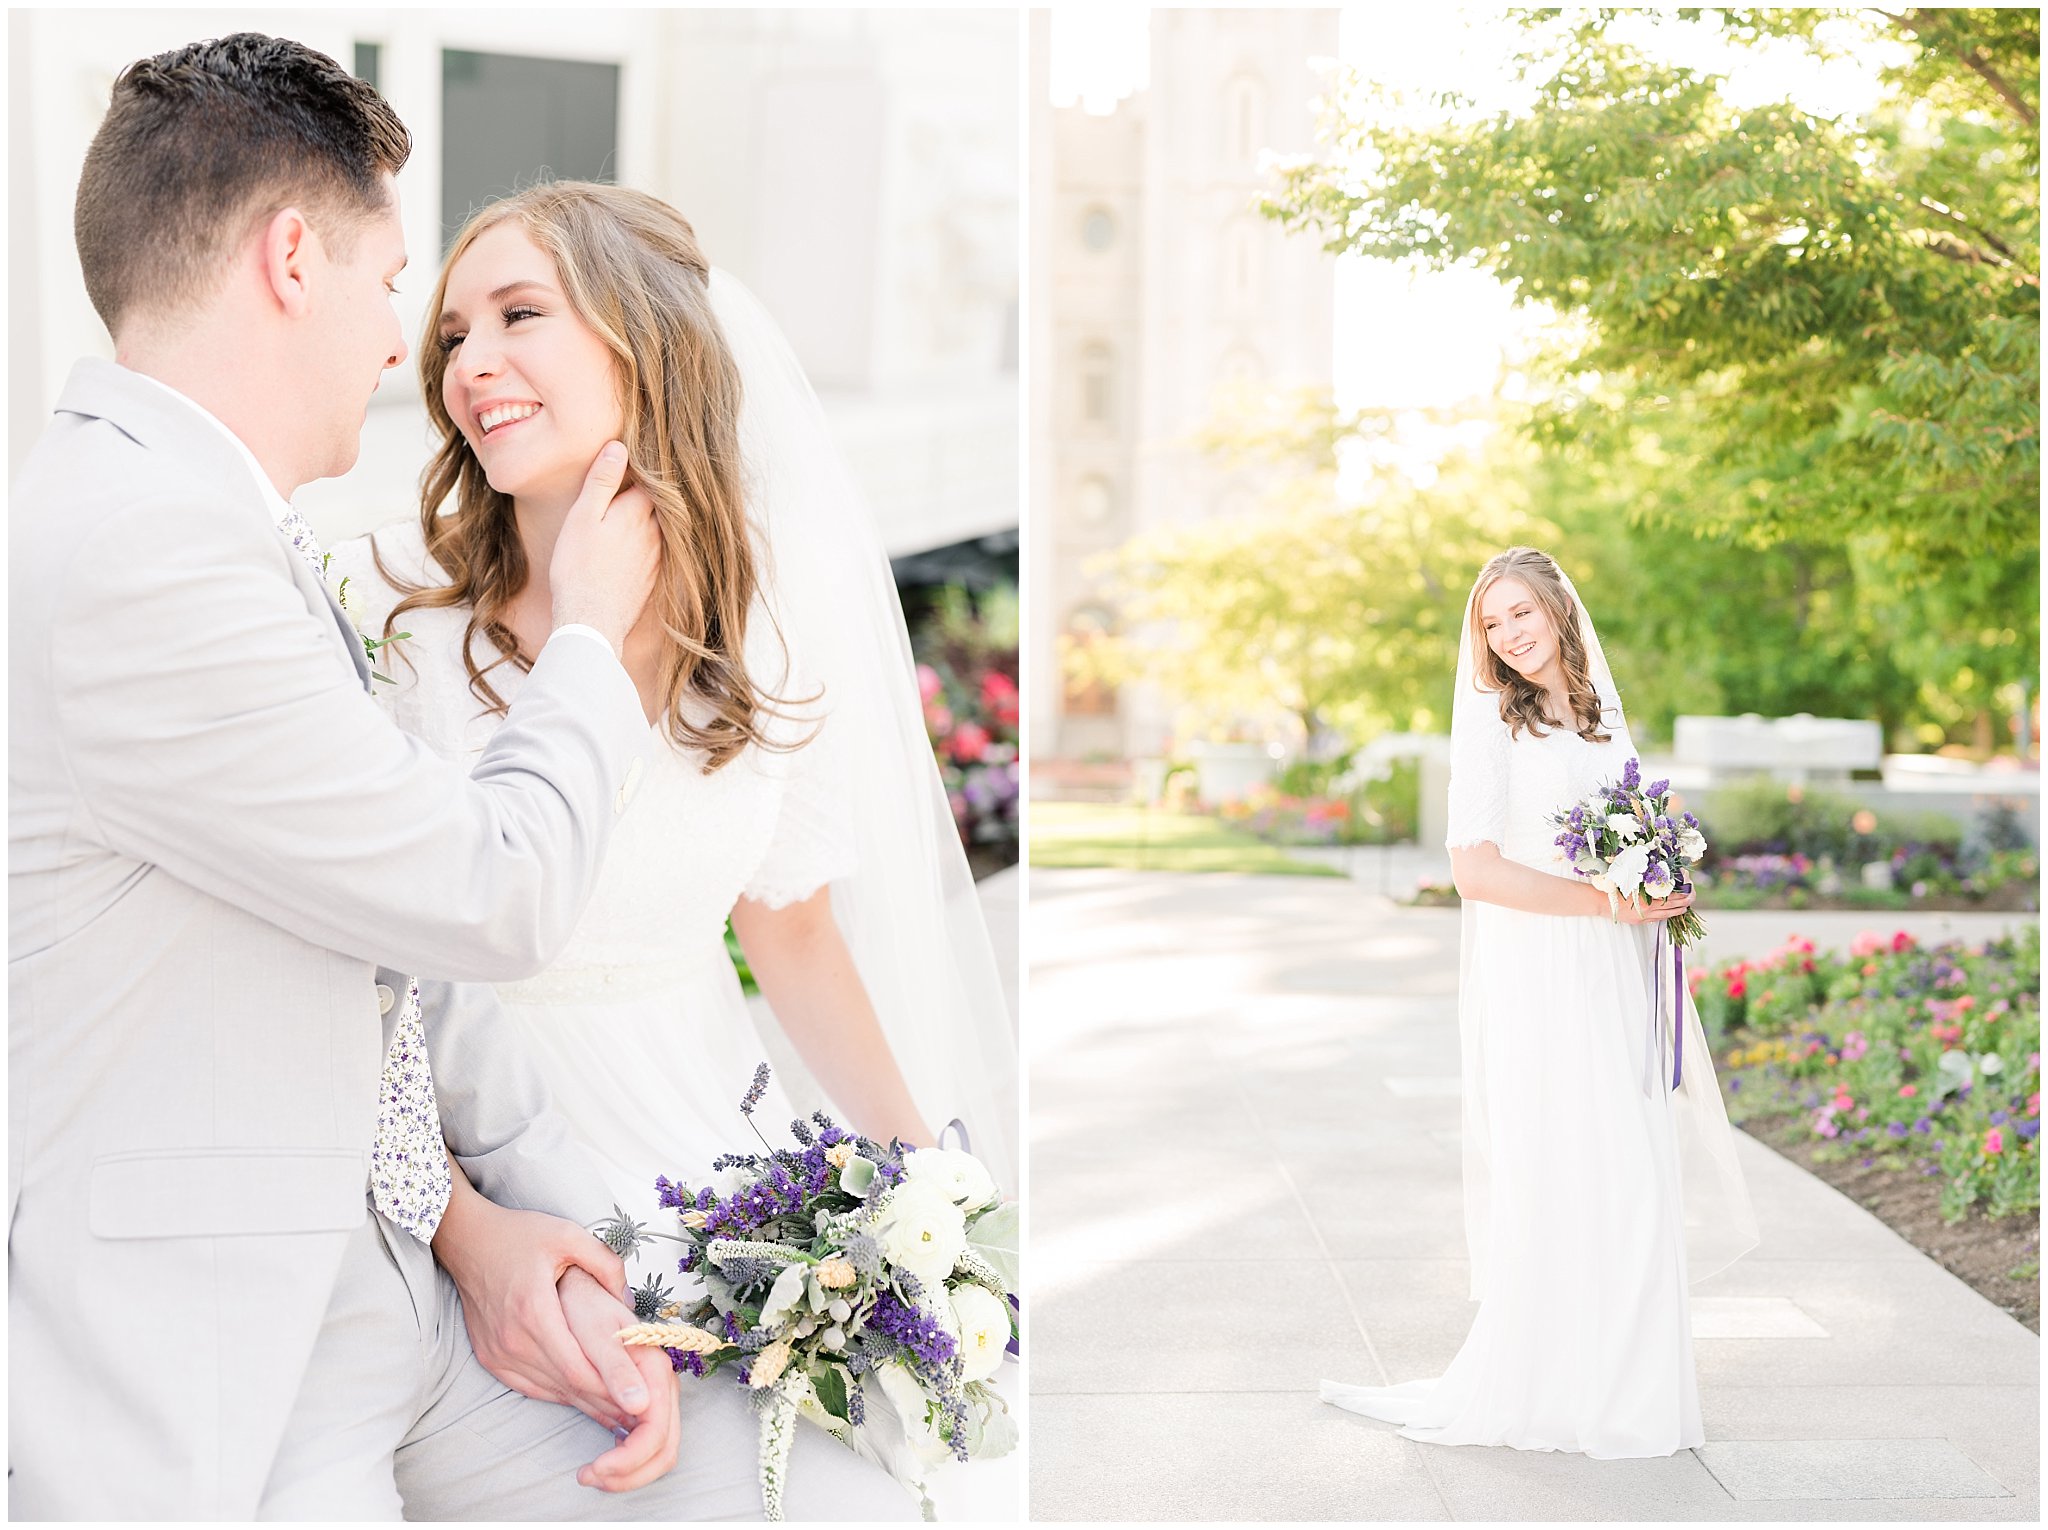 Bride in simple elegant dress with lavender bouquet and groom in grey suit with lavender floral tie | Salt Lake Temple Wedding | Utah Wedding Photographers | Jessie and Dallin Photography